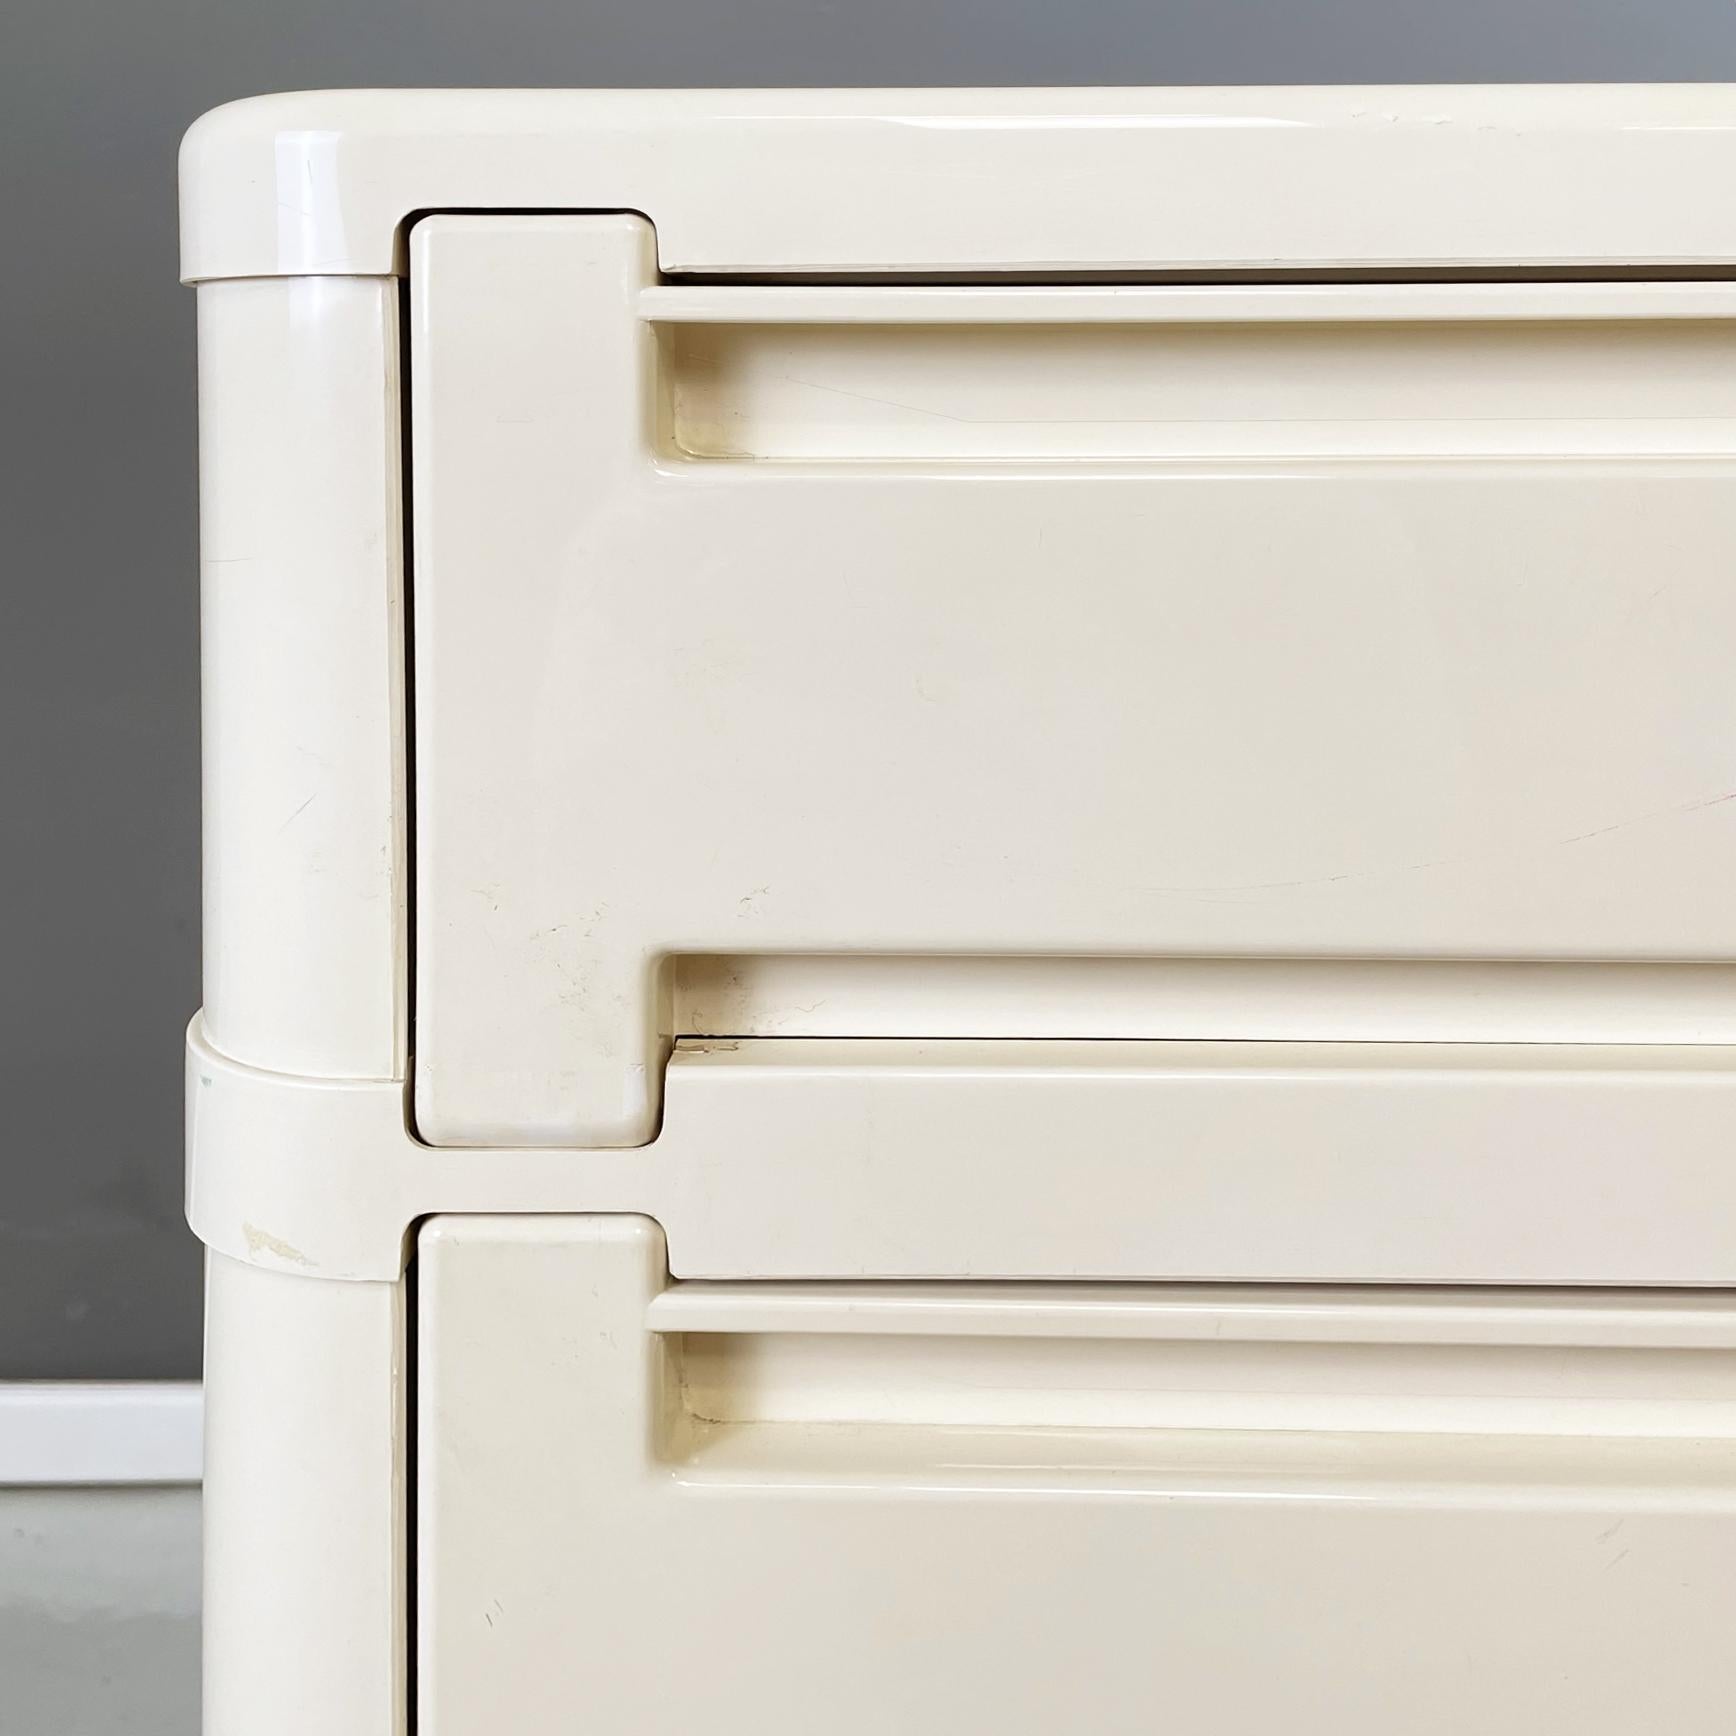 Italian Space age white modular chest of drawer 4964 Olaf Von Boh Kartell 1970s For Sale 1